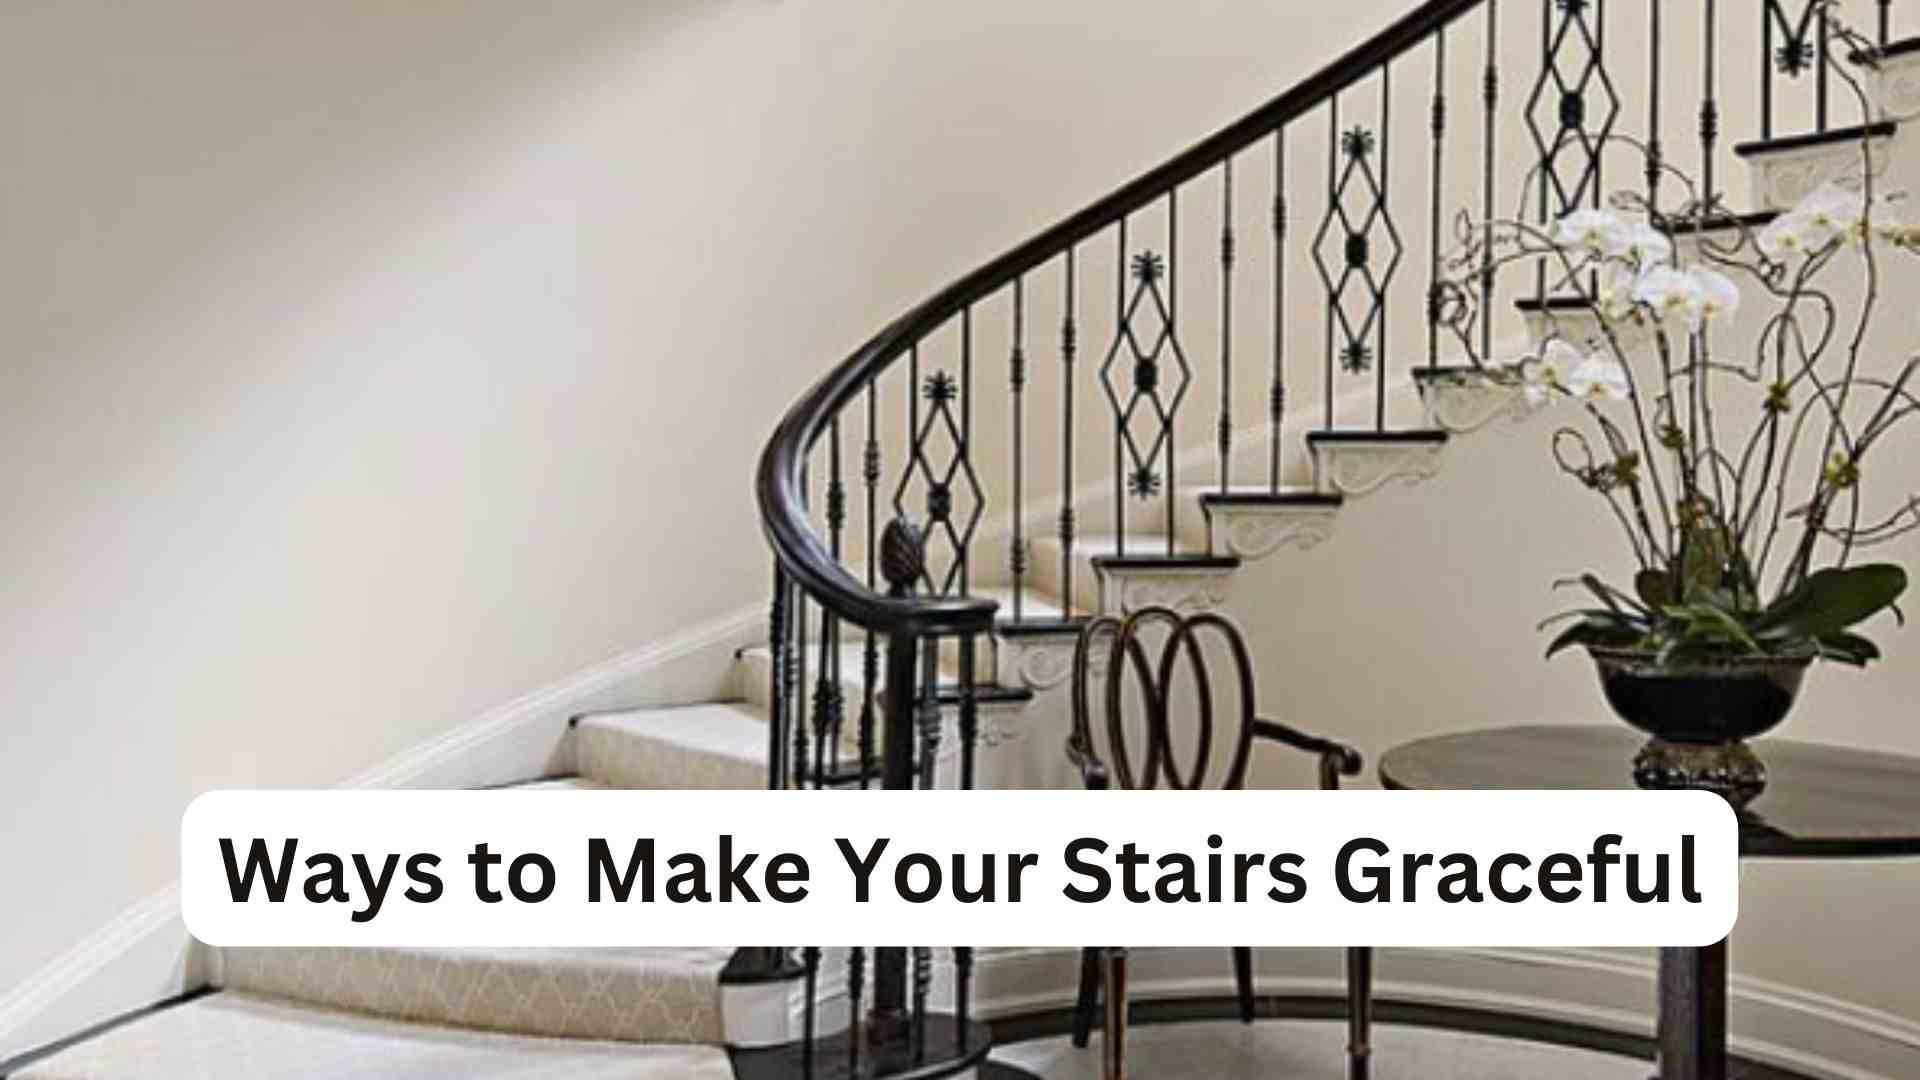 Ways to Make Your Stairs Graceful